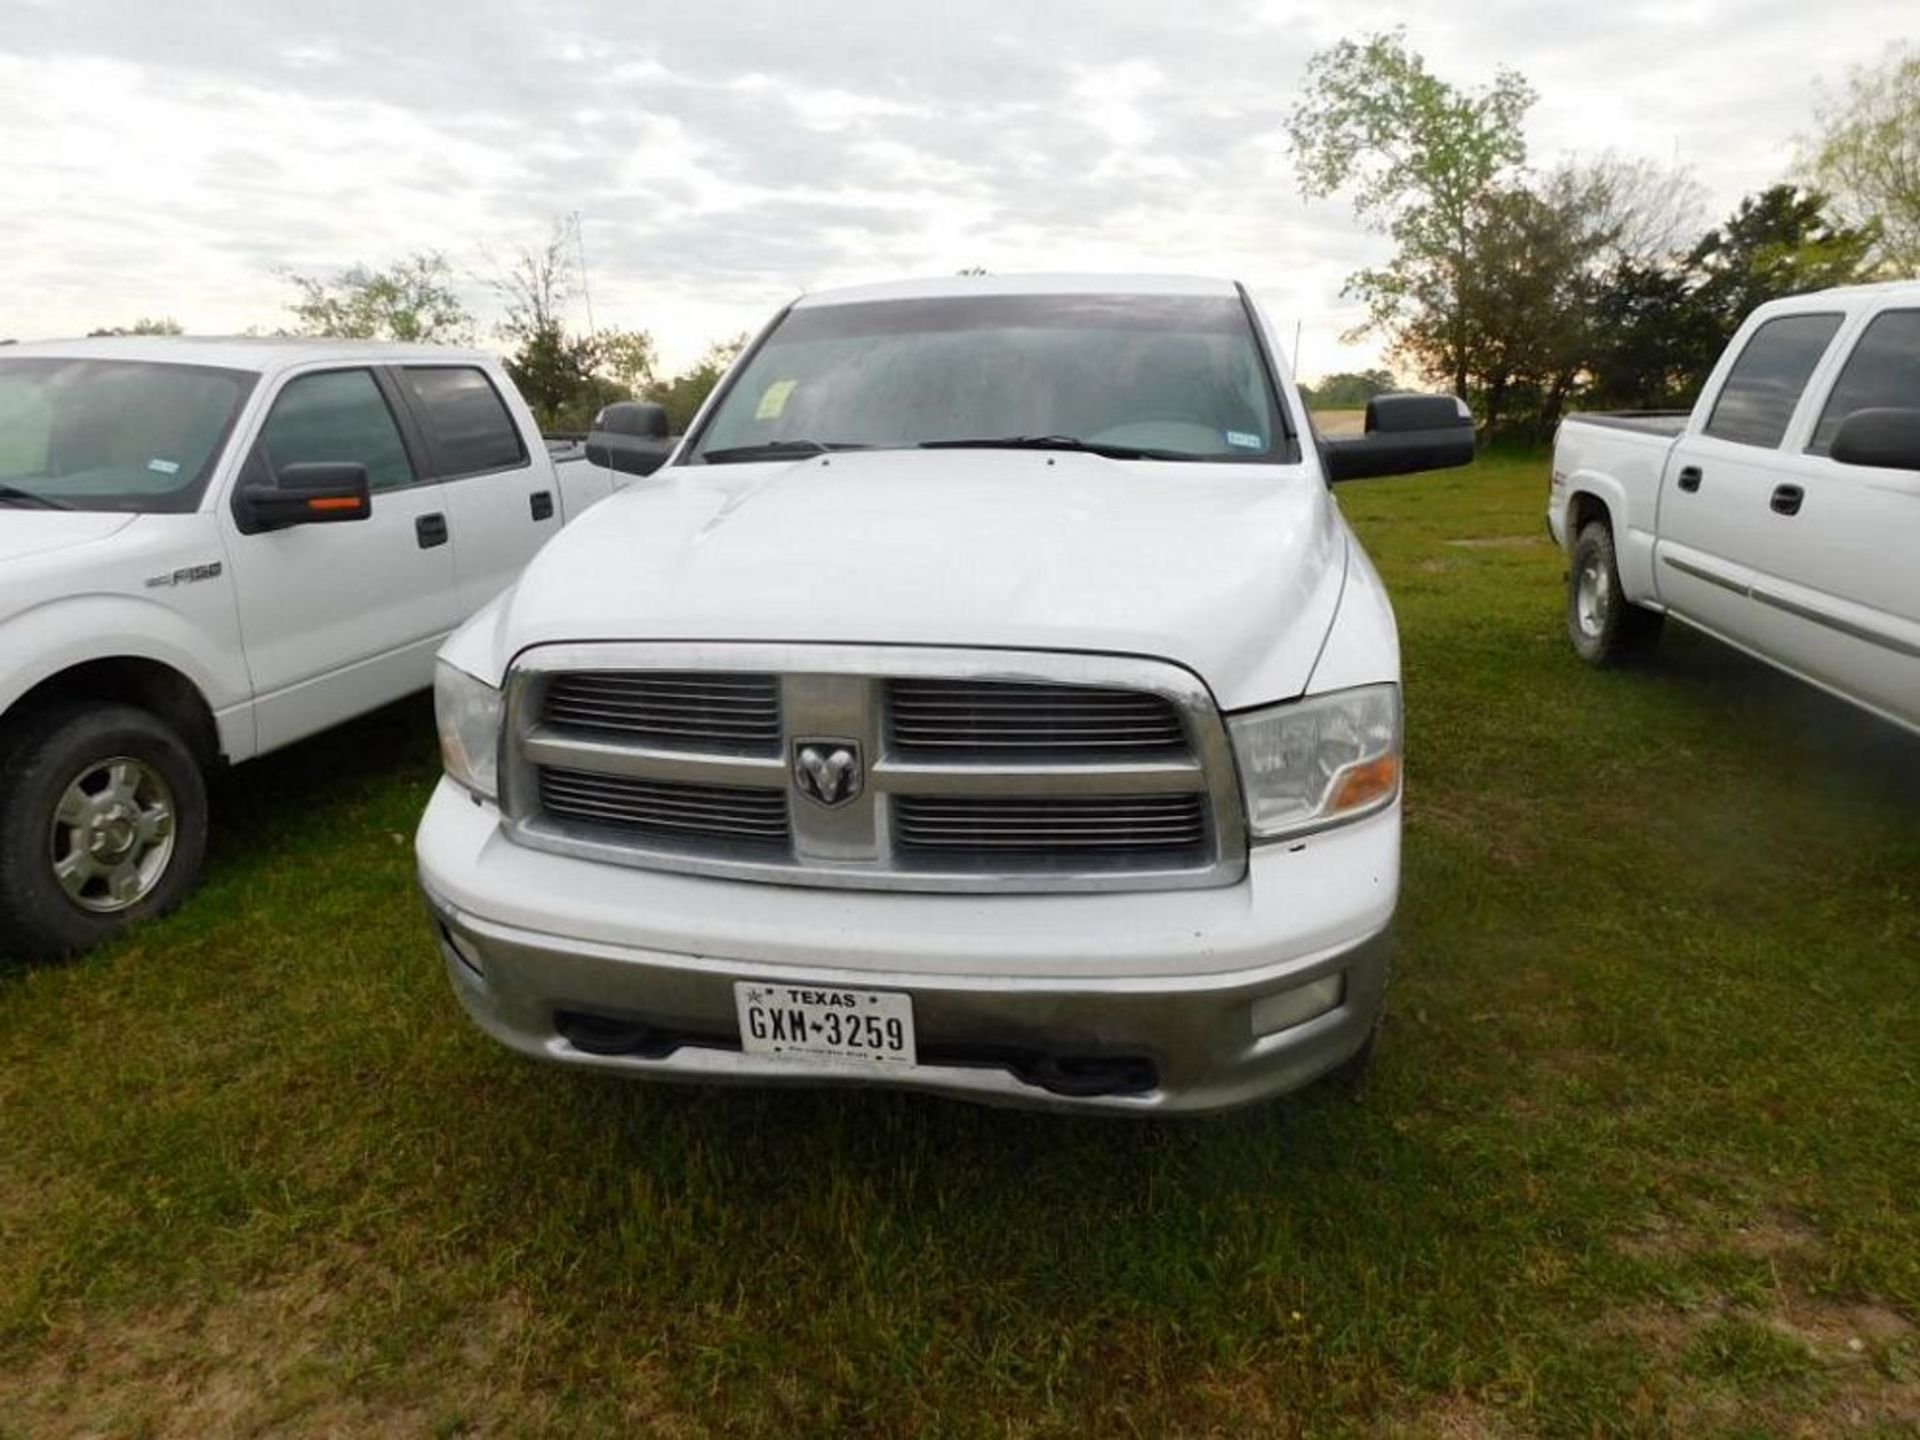 2012 Dodge Ram 1500 4x4 Crew Cab Pick-up Truck, VIN 1C6RD7LT3CS209341, 5-1/2 ft. Bed with Integral T - Image 3 of 5